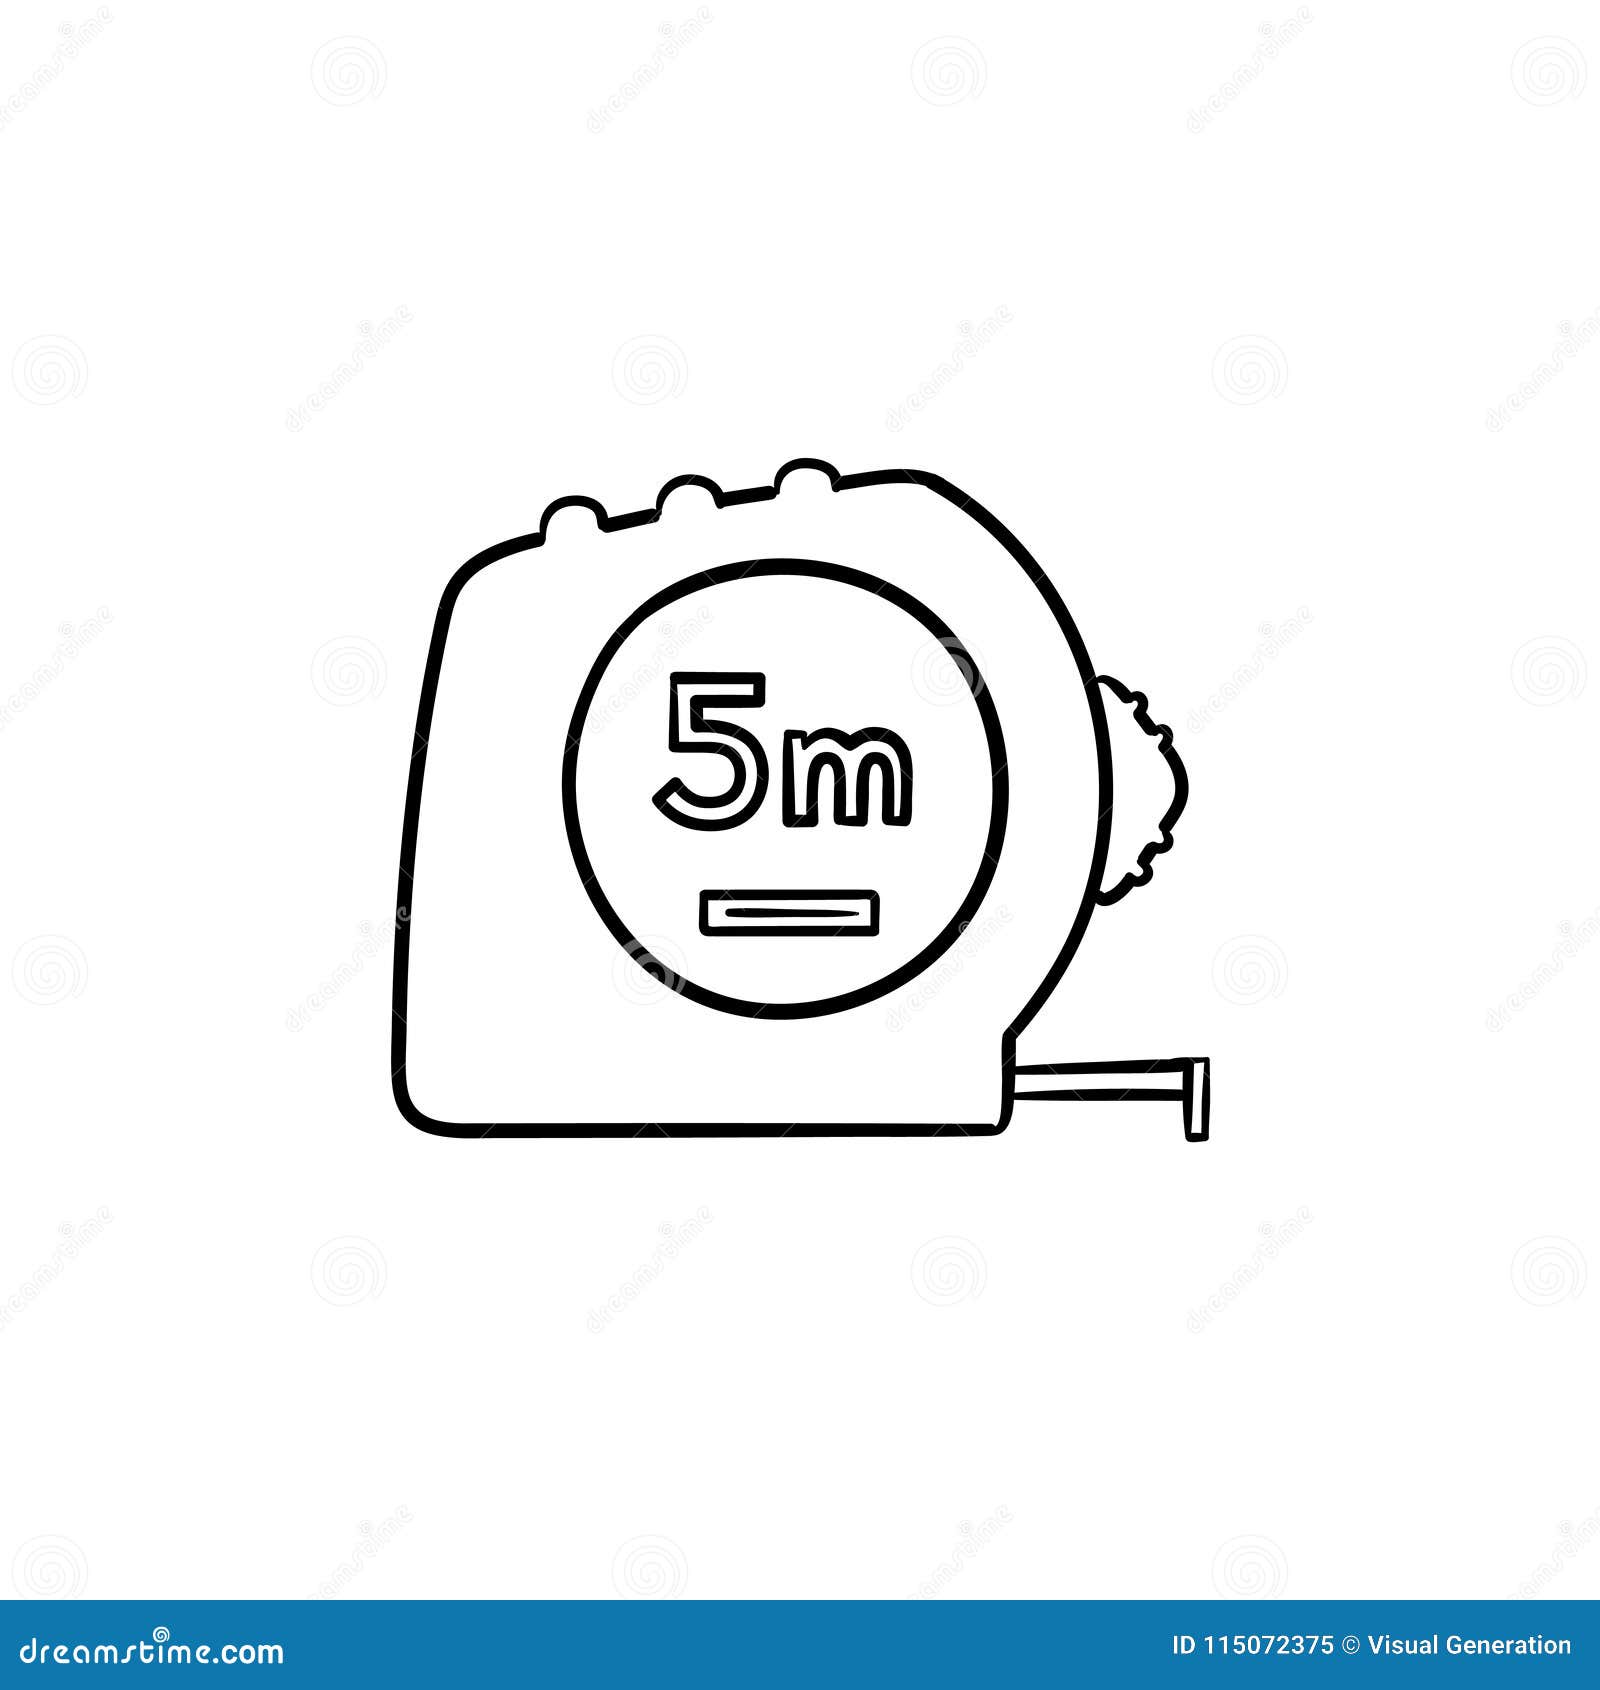 Tape Measure Vector Art, Icons, and Graphics for Free Download